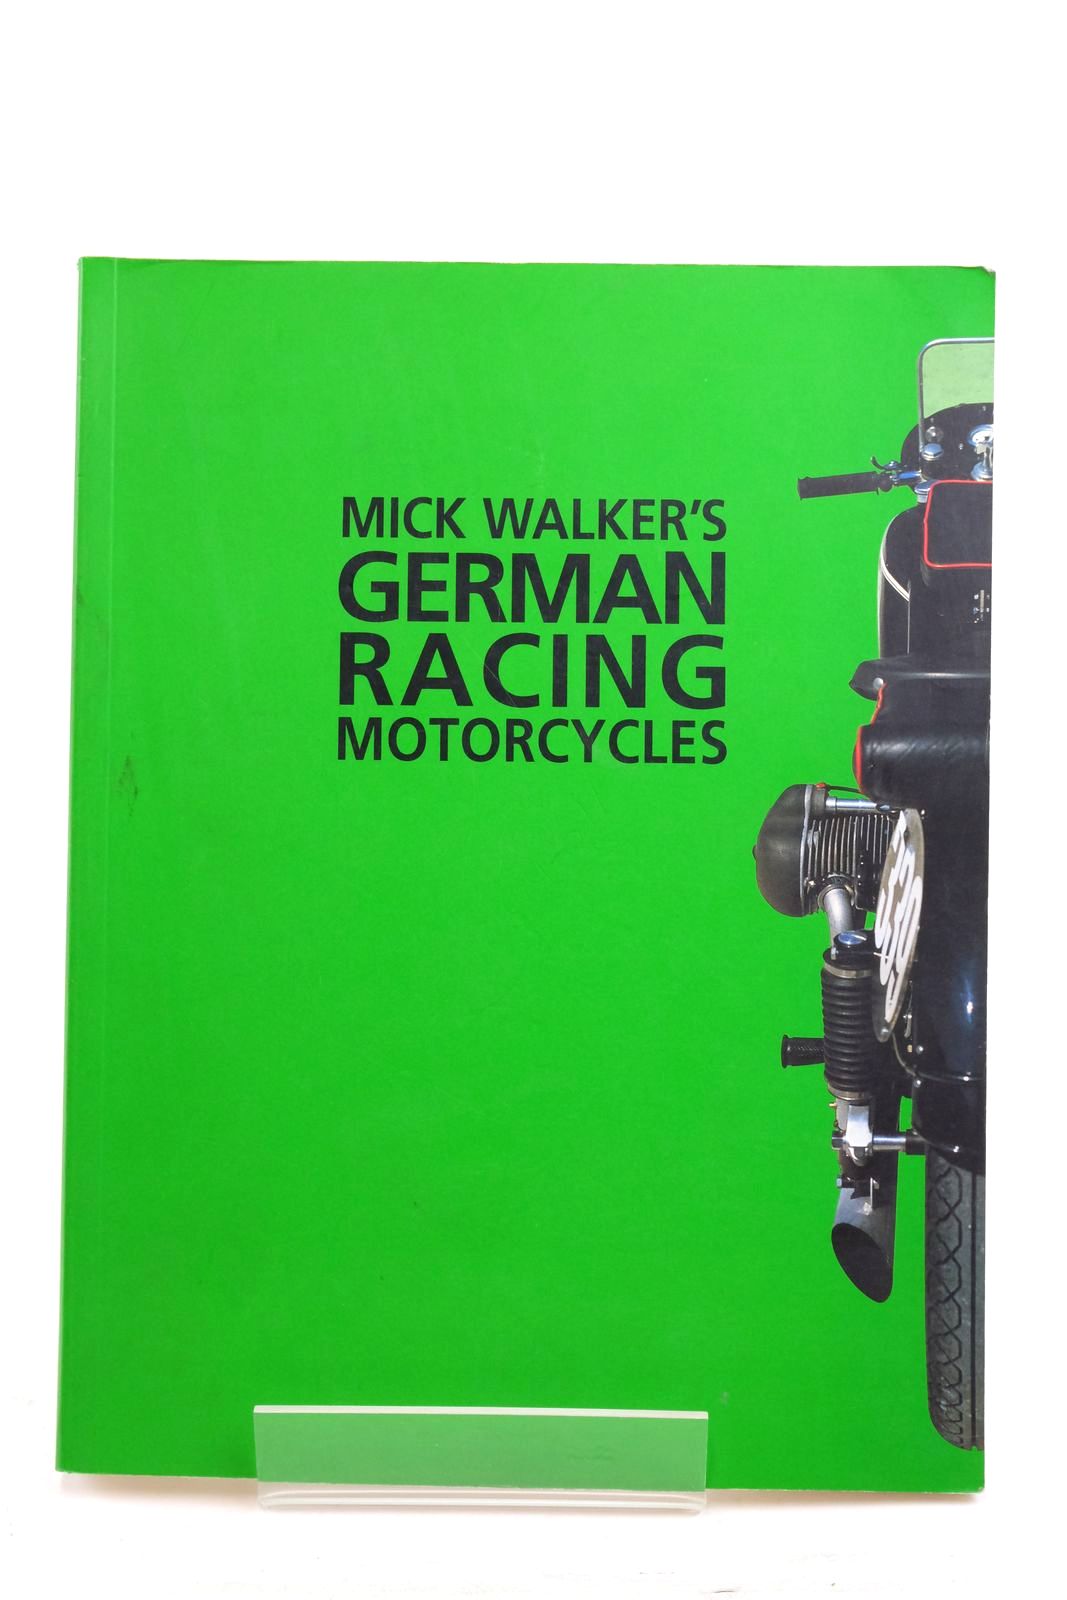 Photo of MICK WALKER'S GERMAN RACING MOTORCYCLES written by Walker, Mick published by Redline Books (STOCK CODE: 2137518)  for sale by Stella & Rose's Books